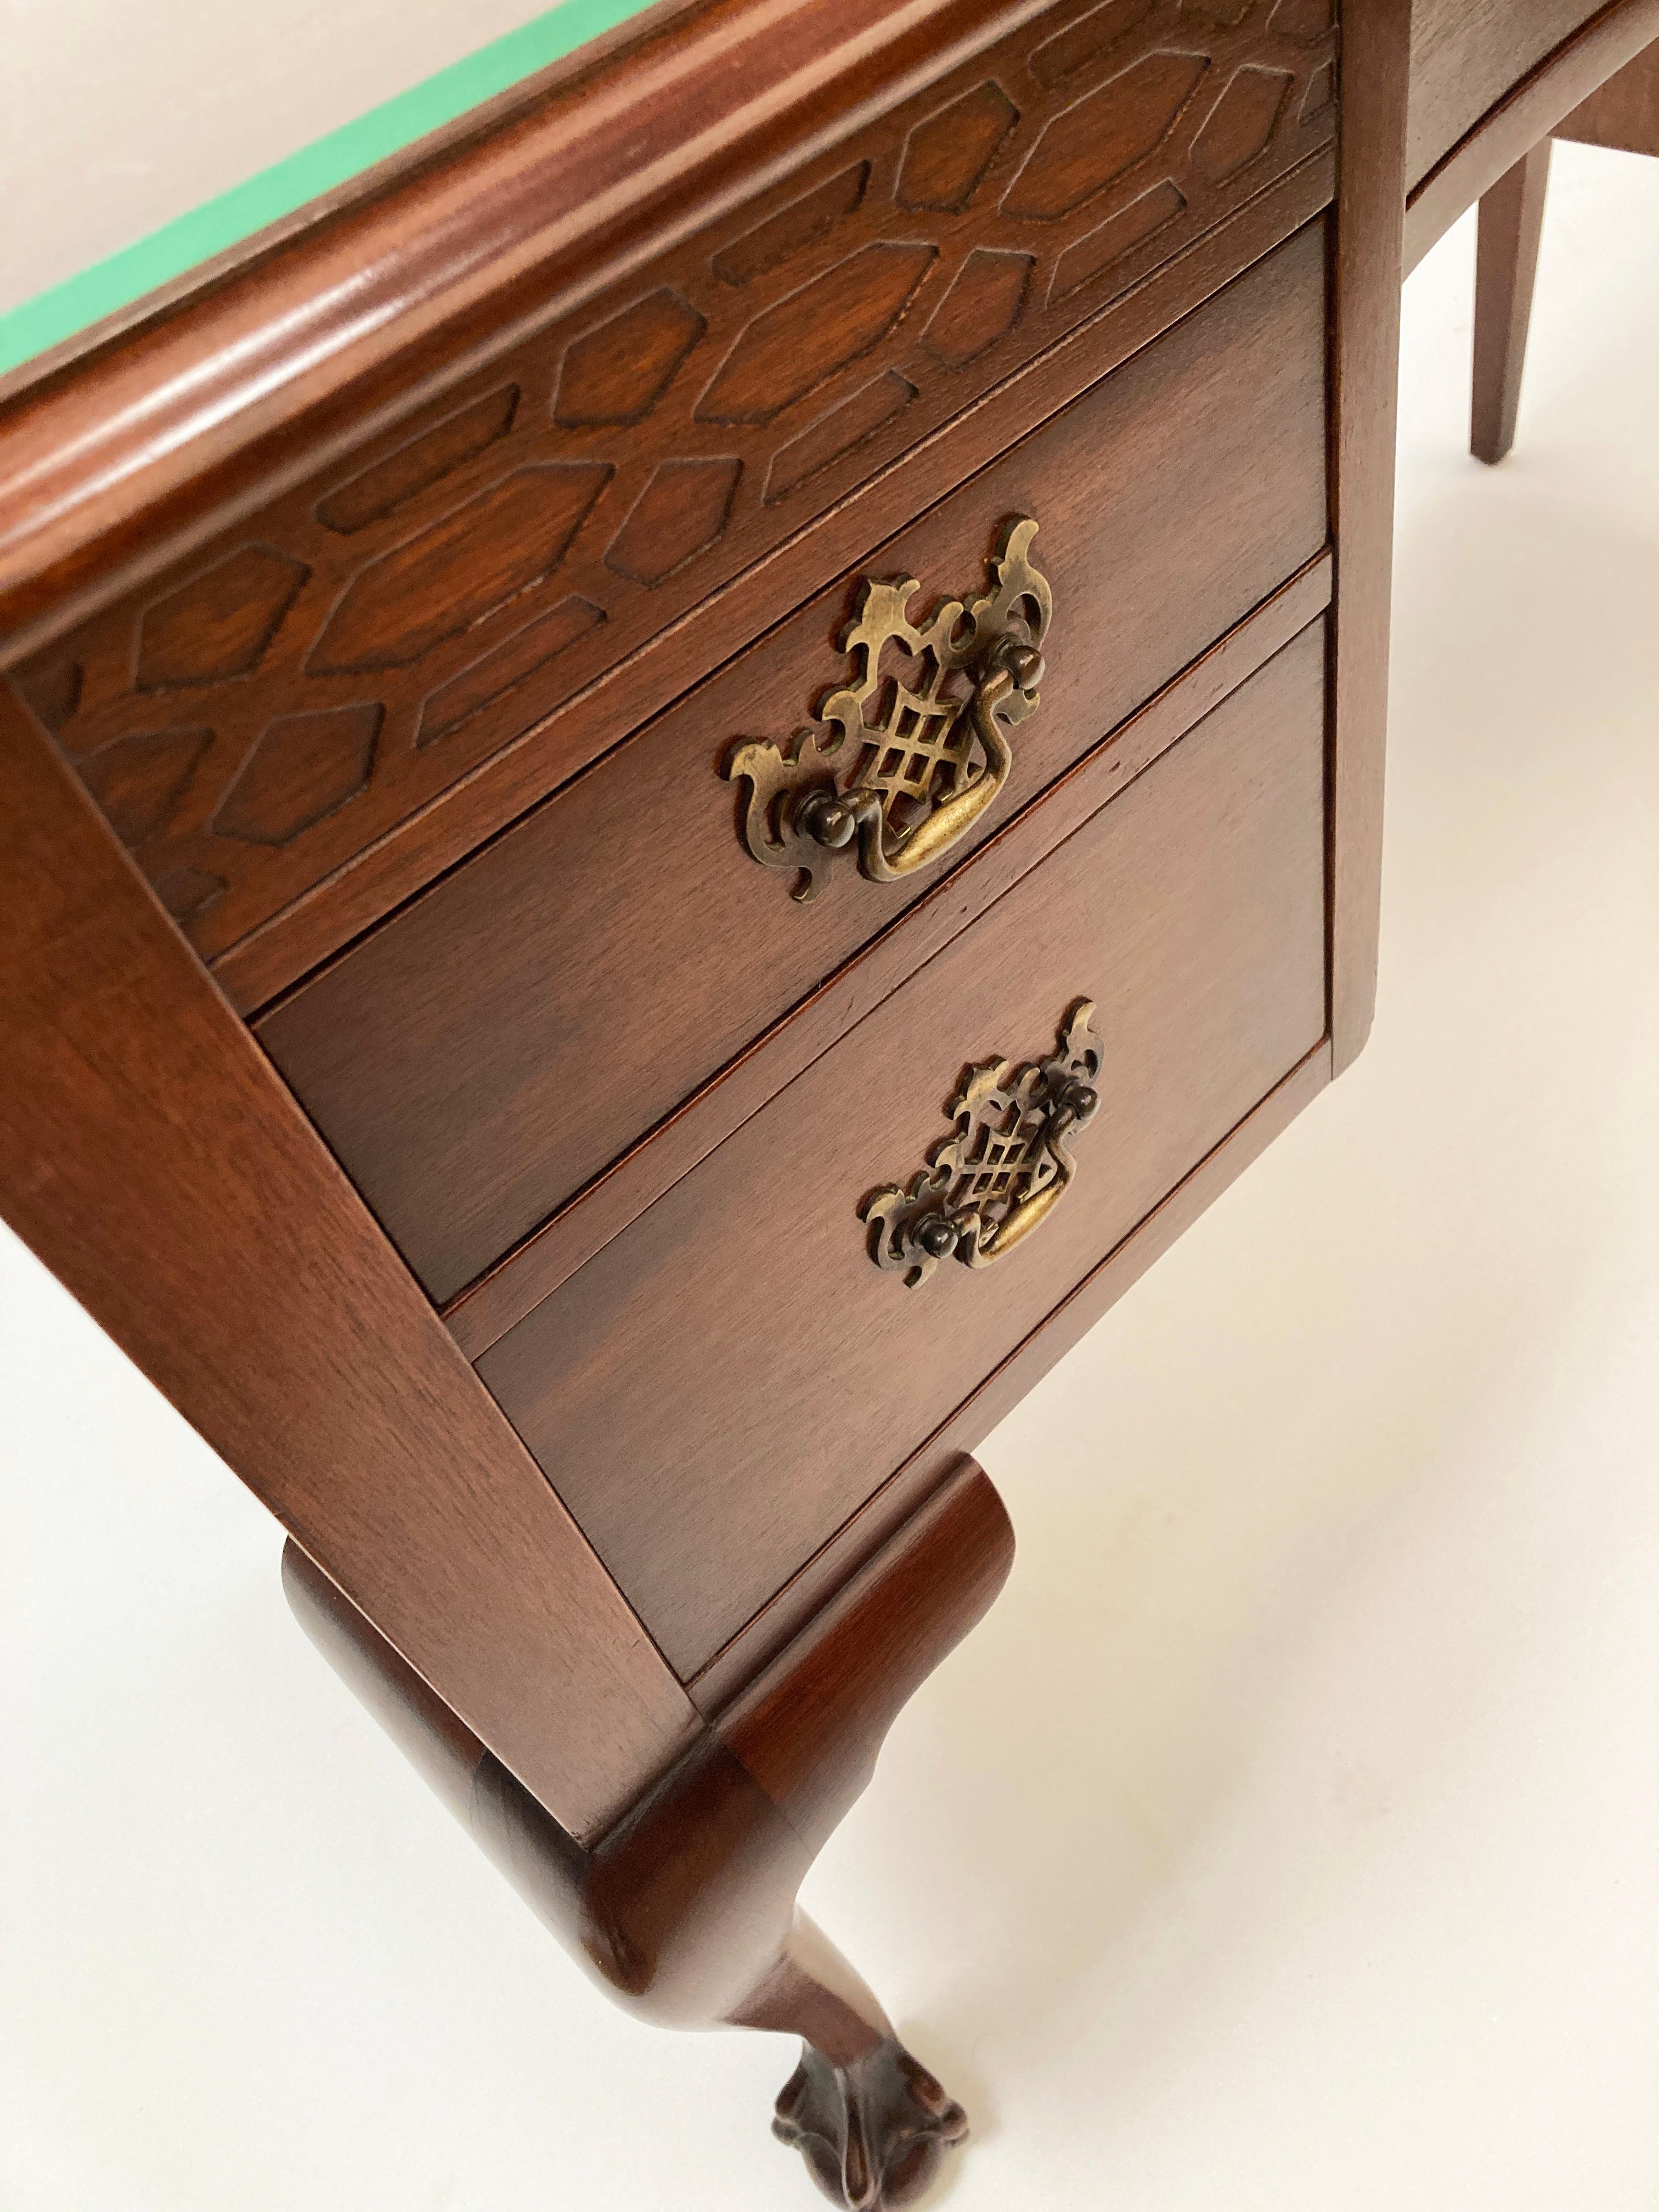 chippendale writing desk